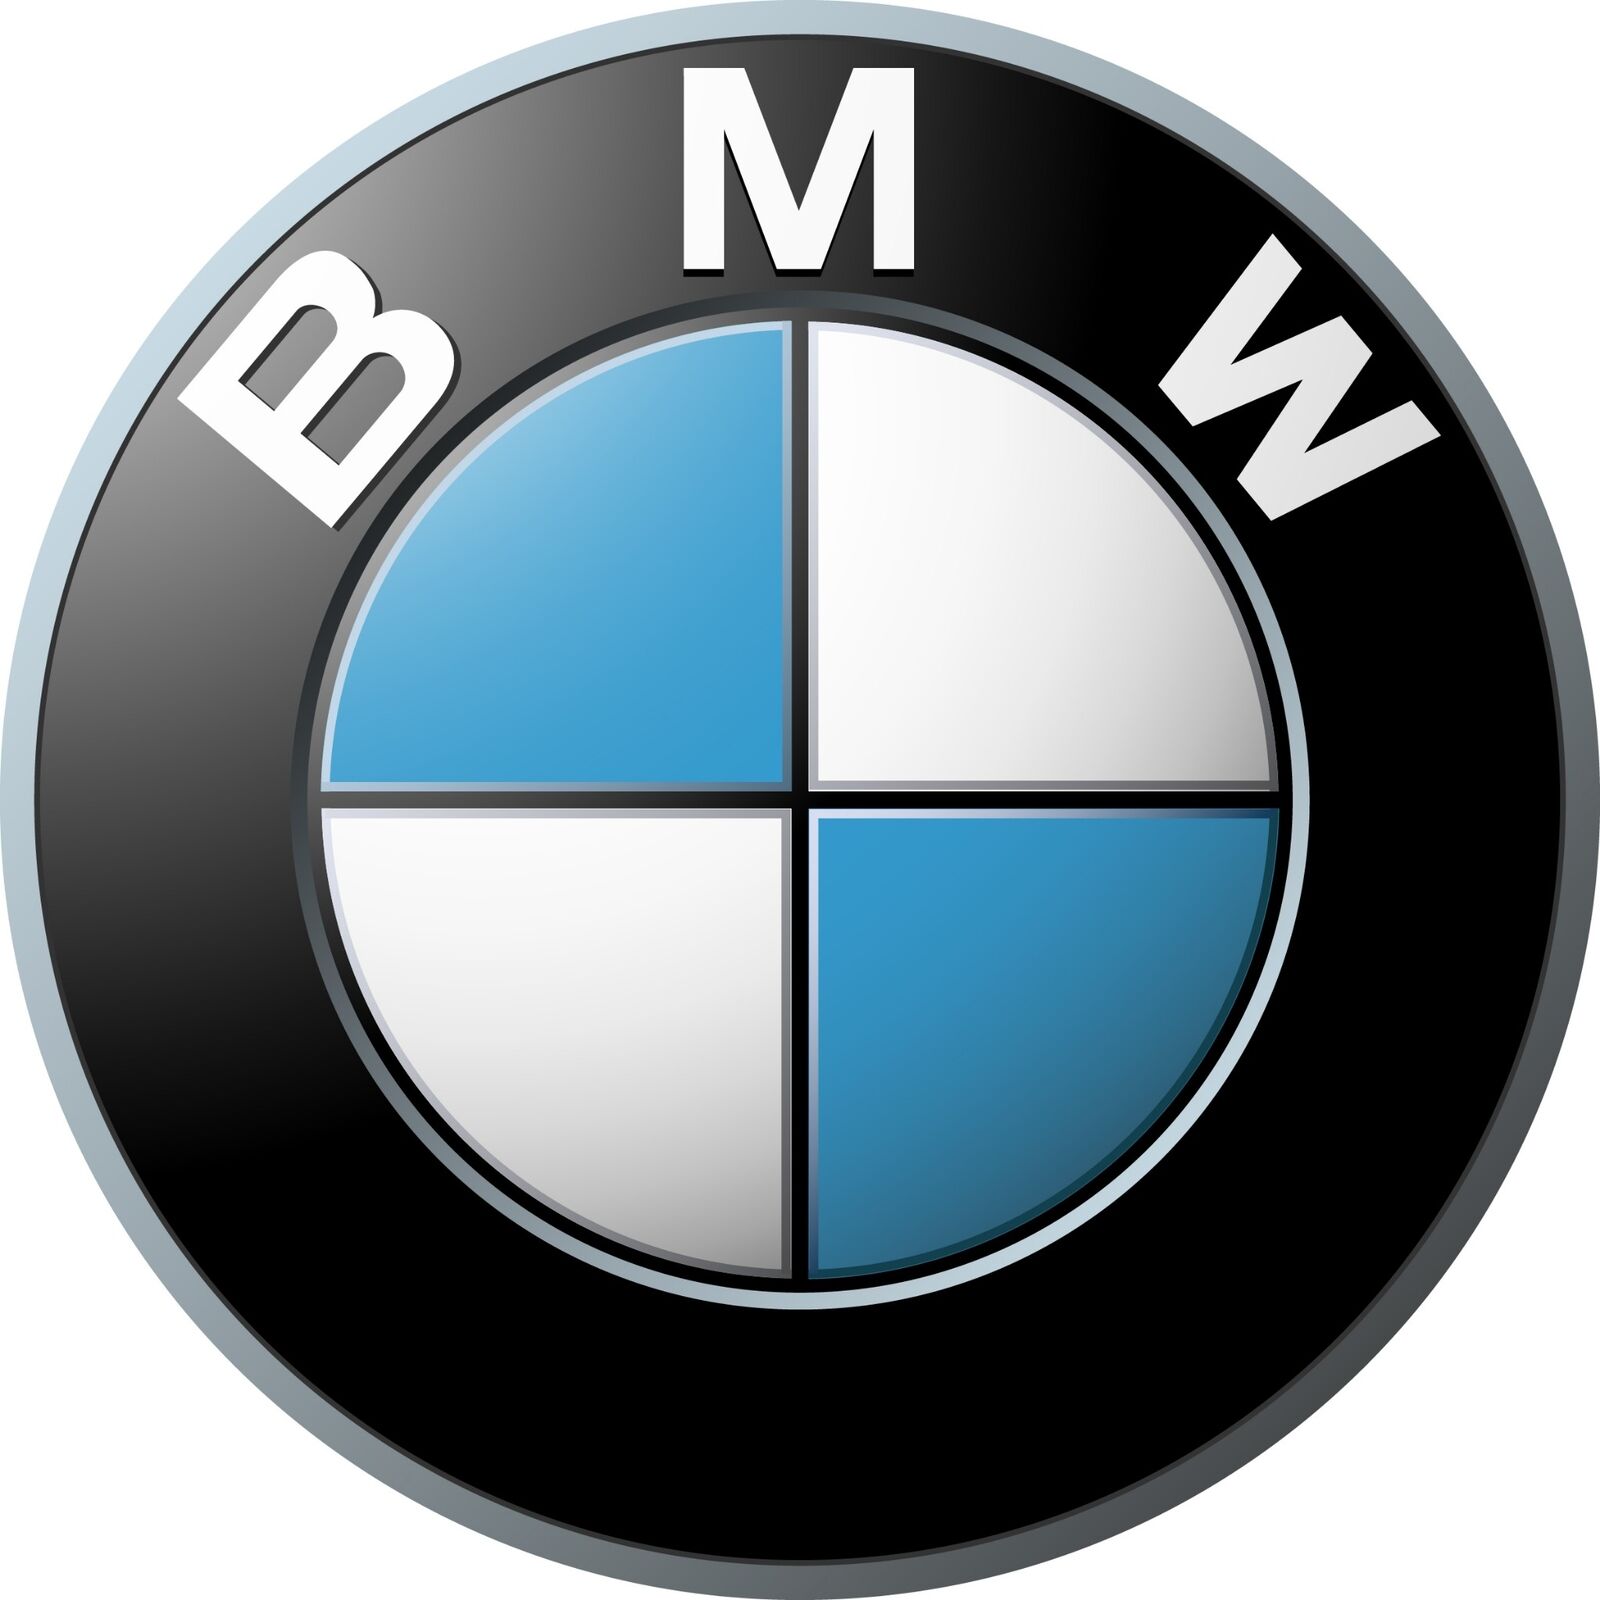 BMW Car sticker Vinyl Decal |10 Sizes with TRACKING